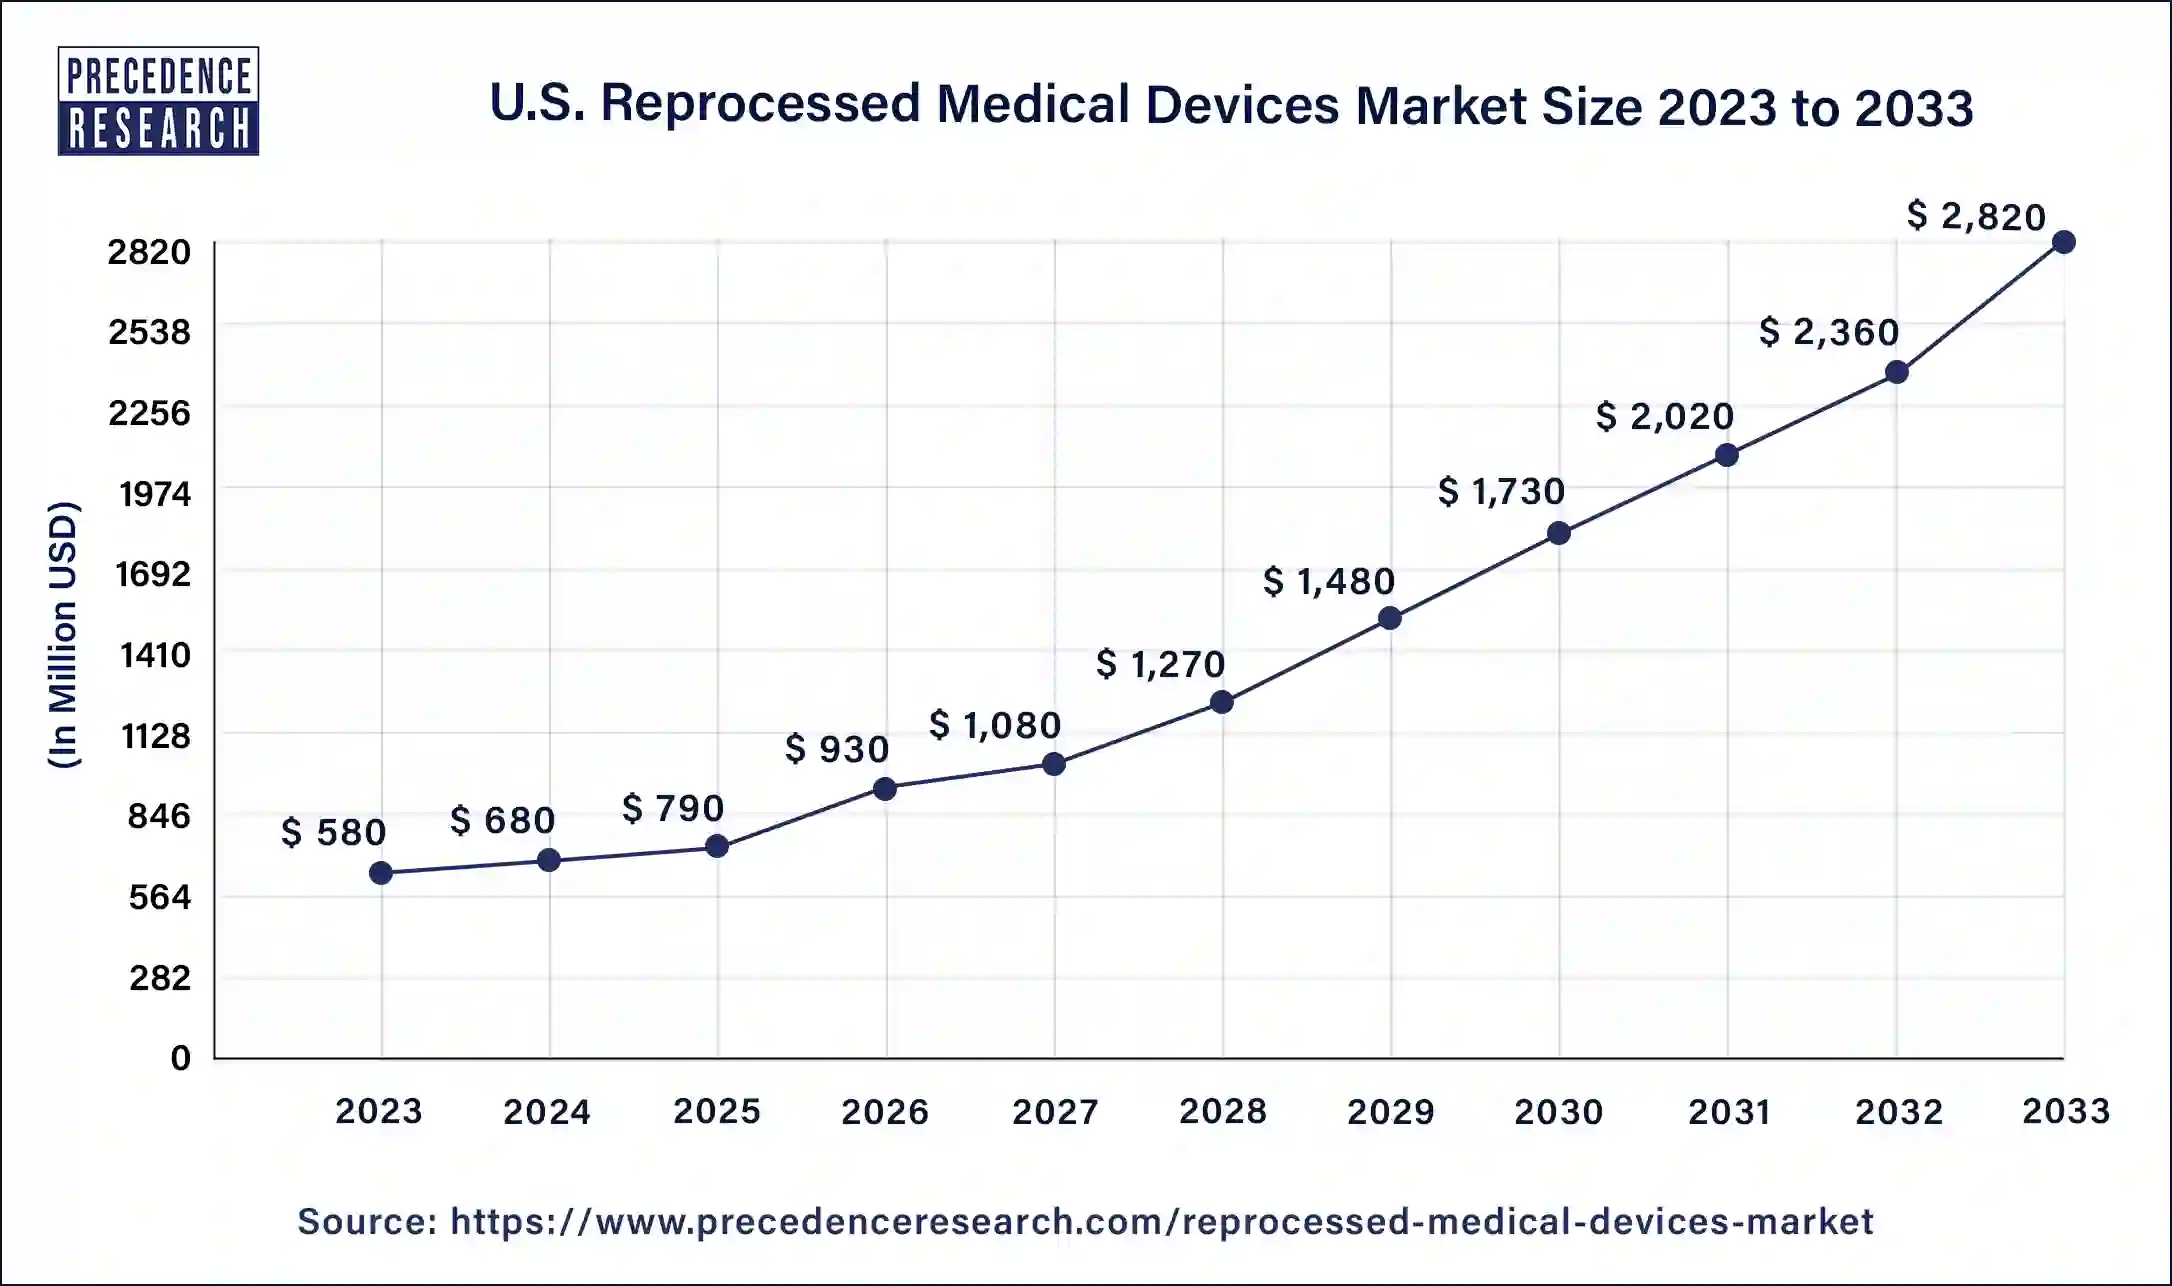 U.S. Reprocessed Medical Devices Market Size 2024 to 2033